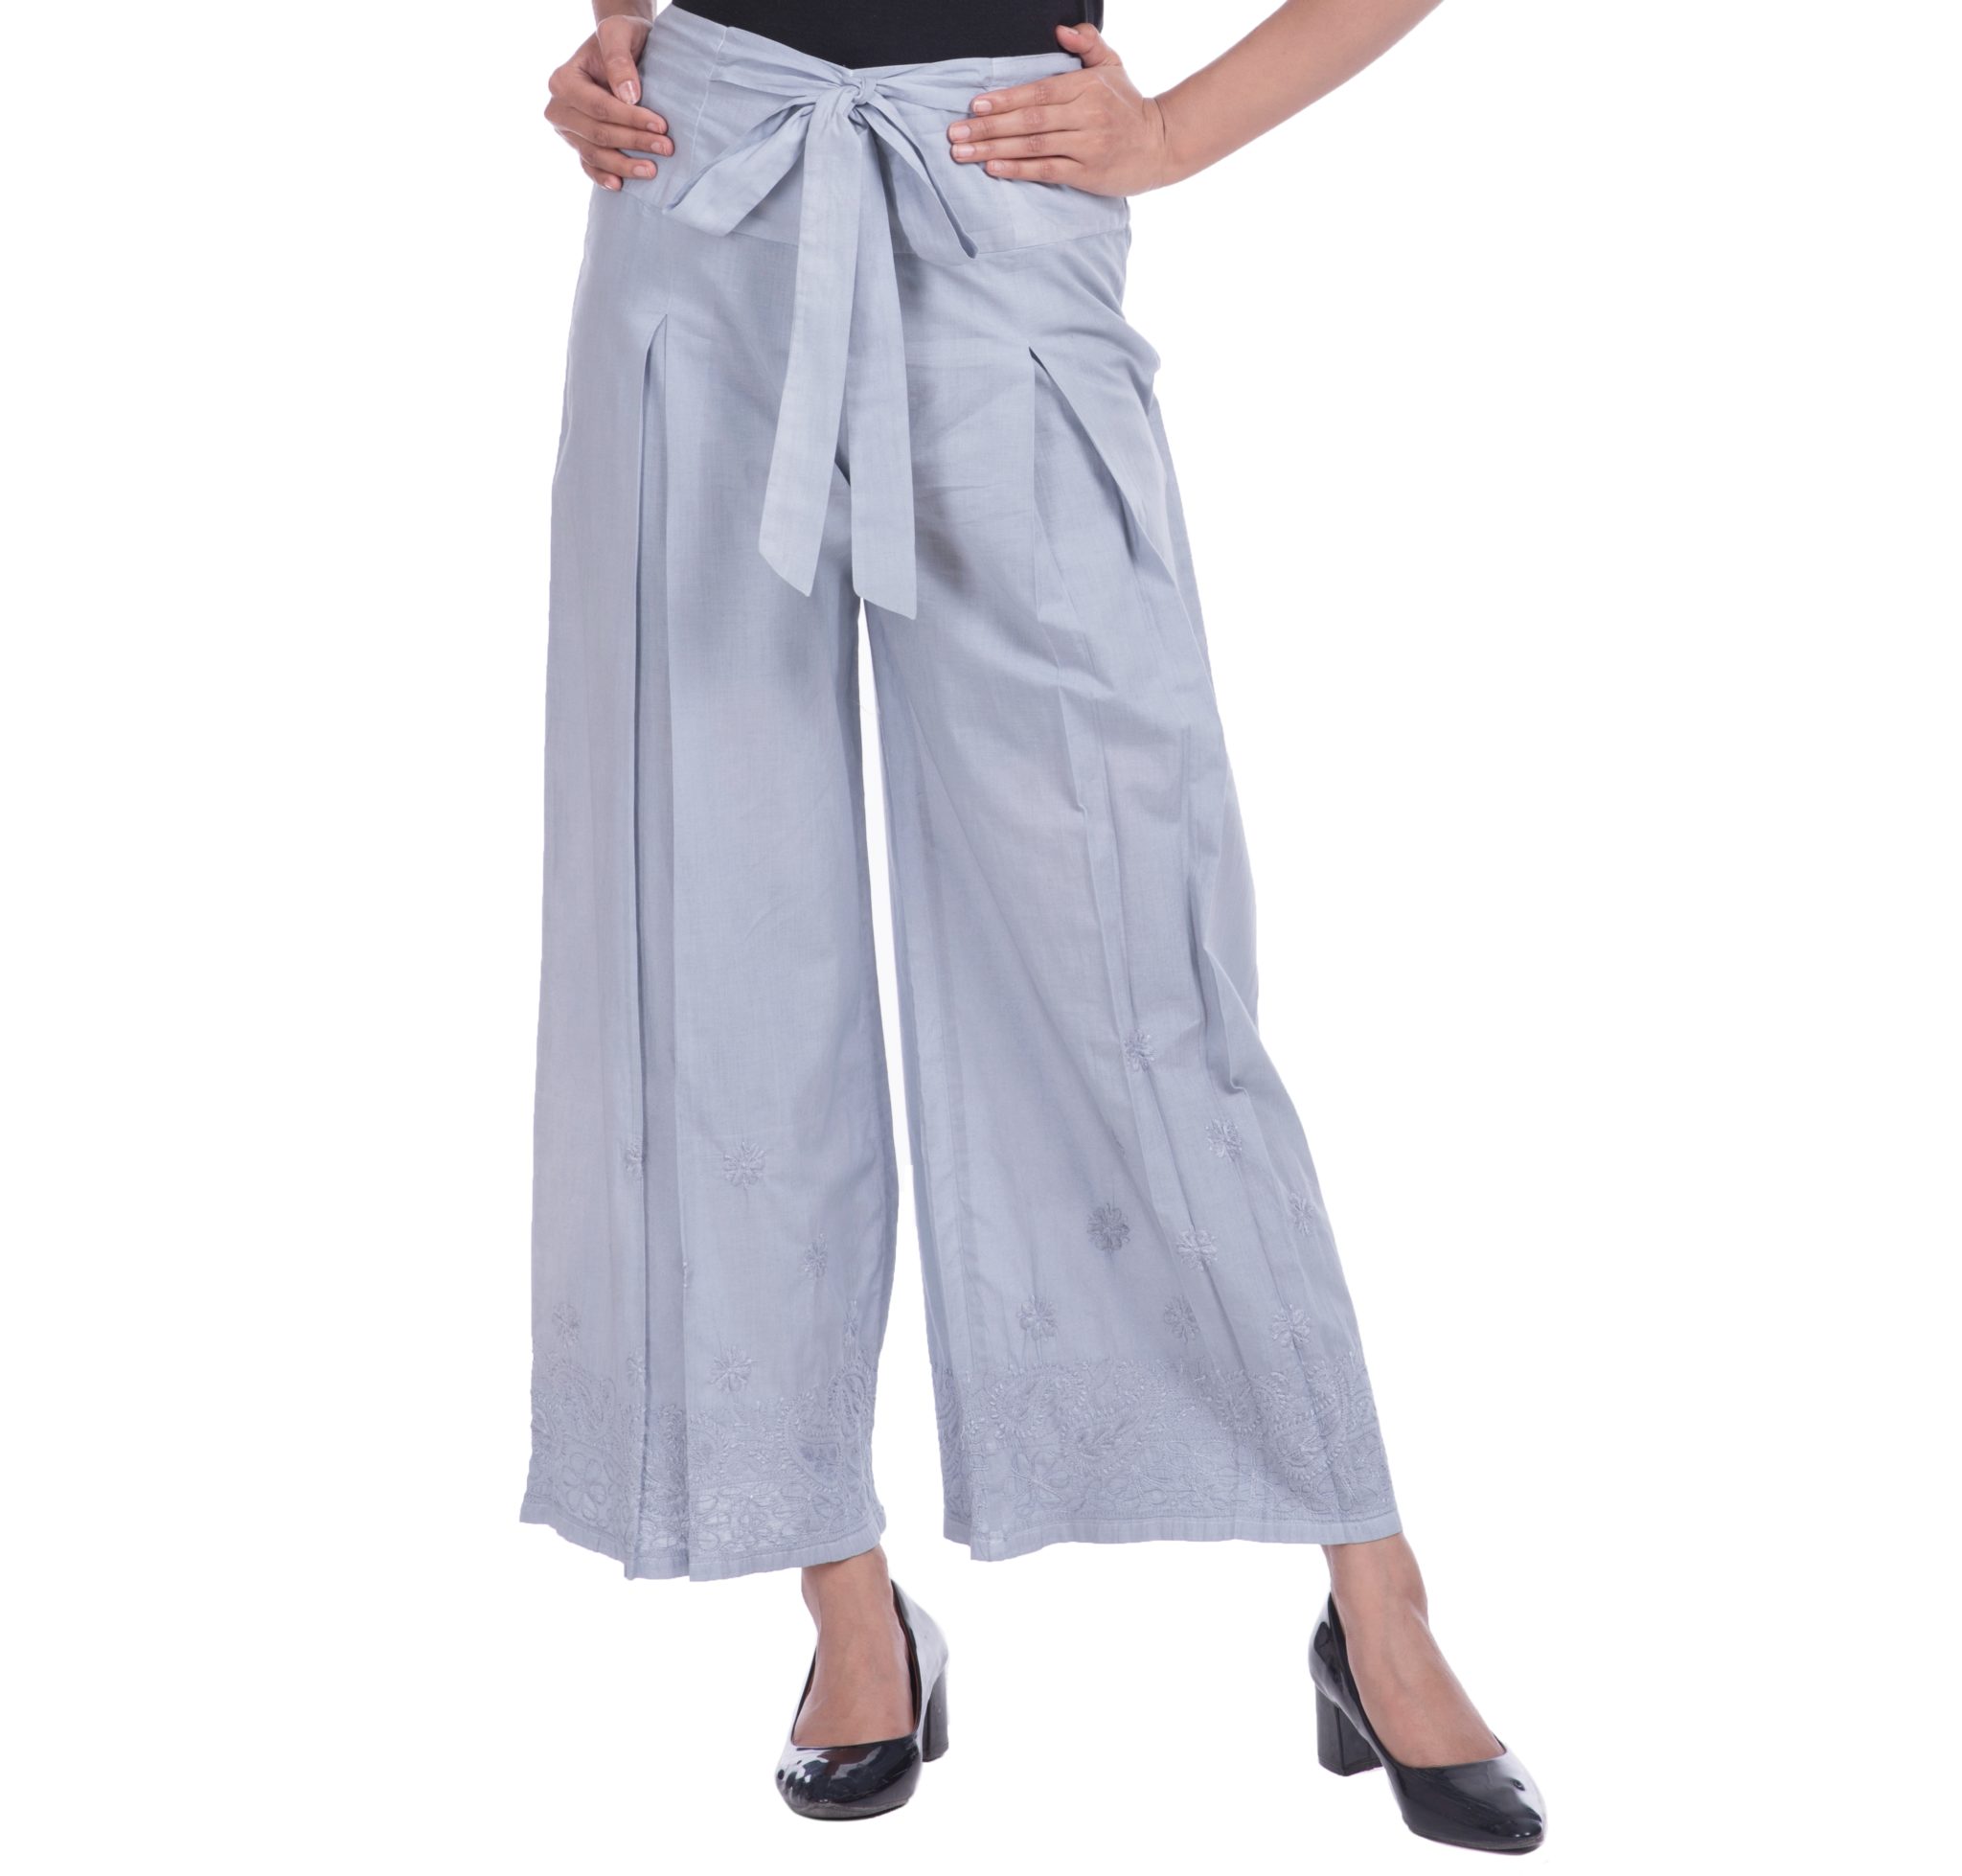 Box pleat palazzo with belt detail in grey color | EnBFashion